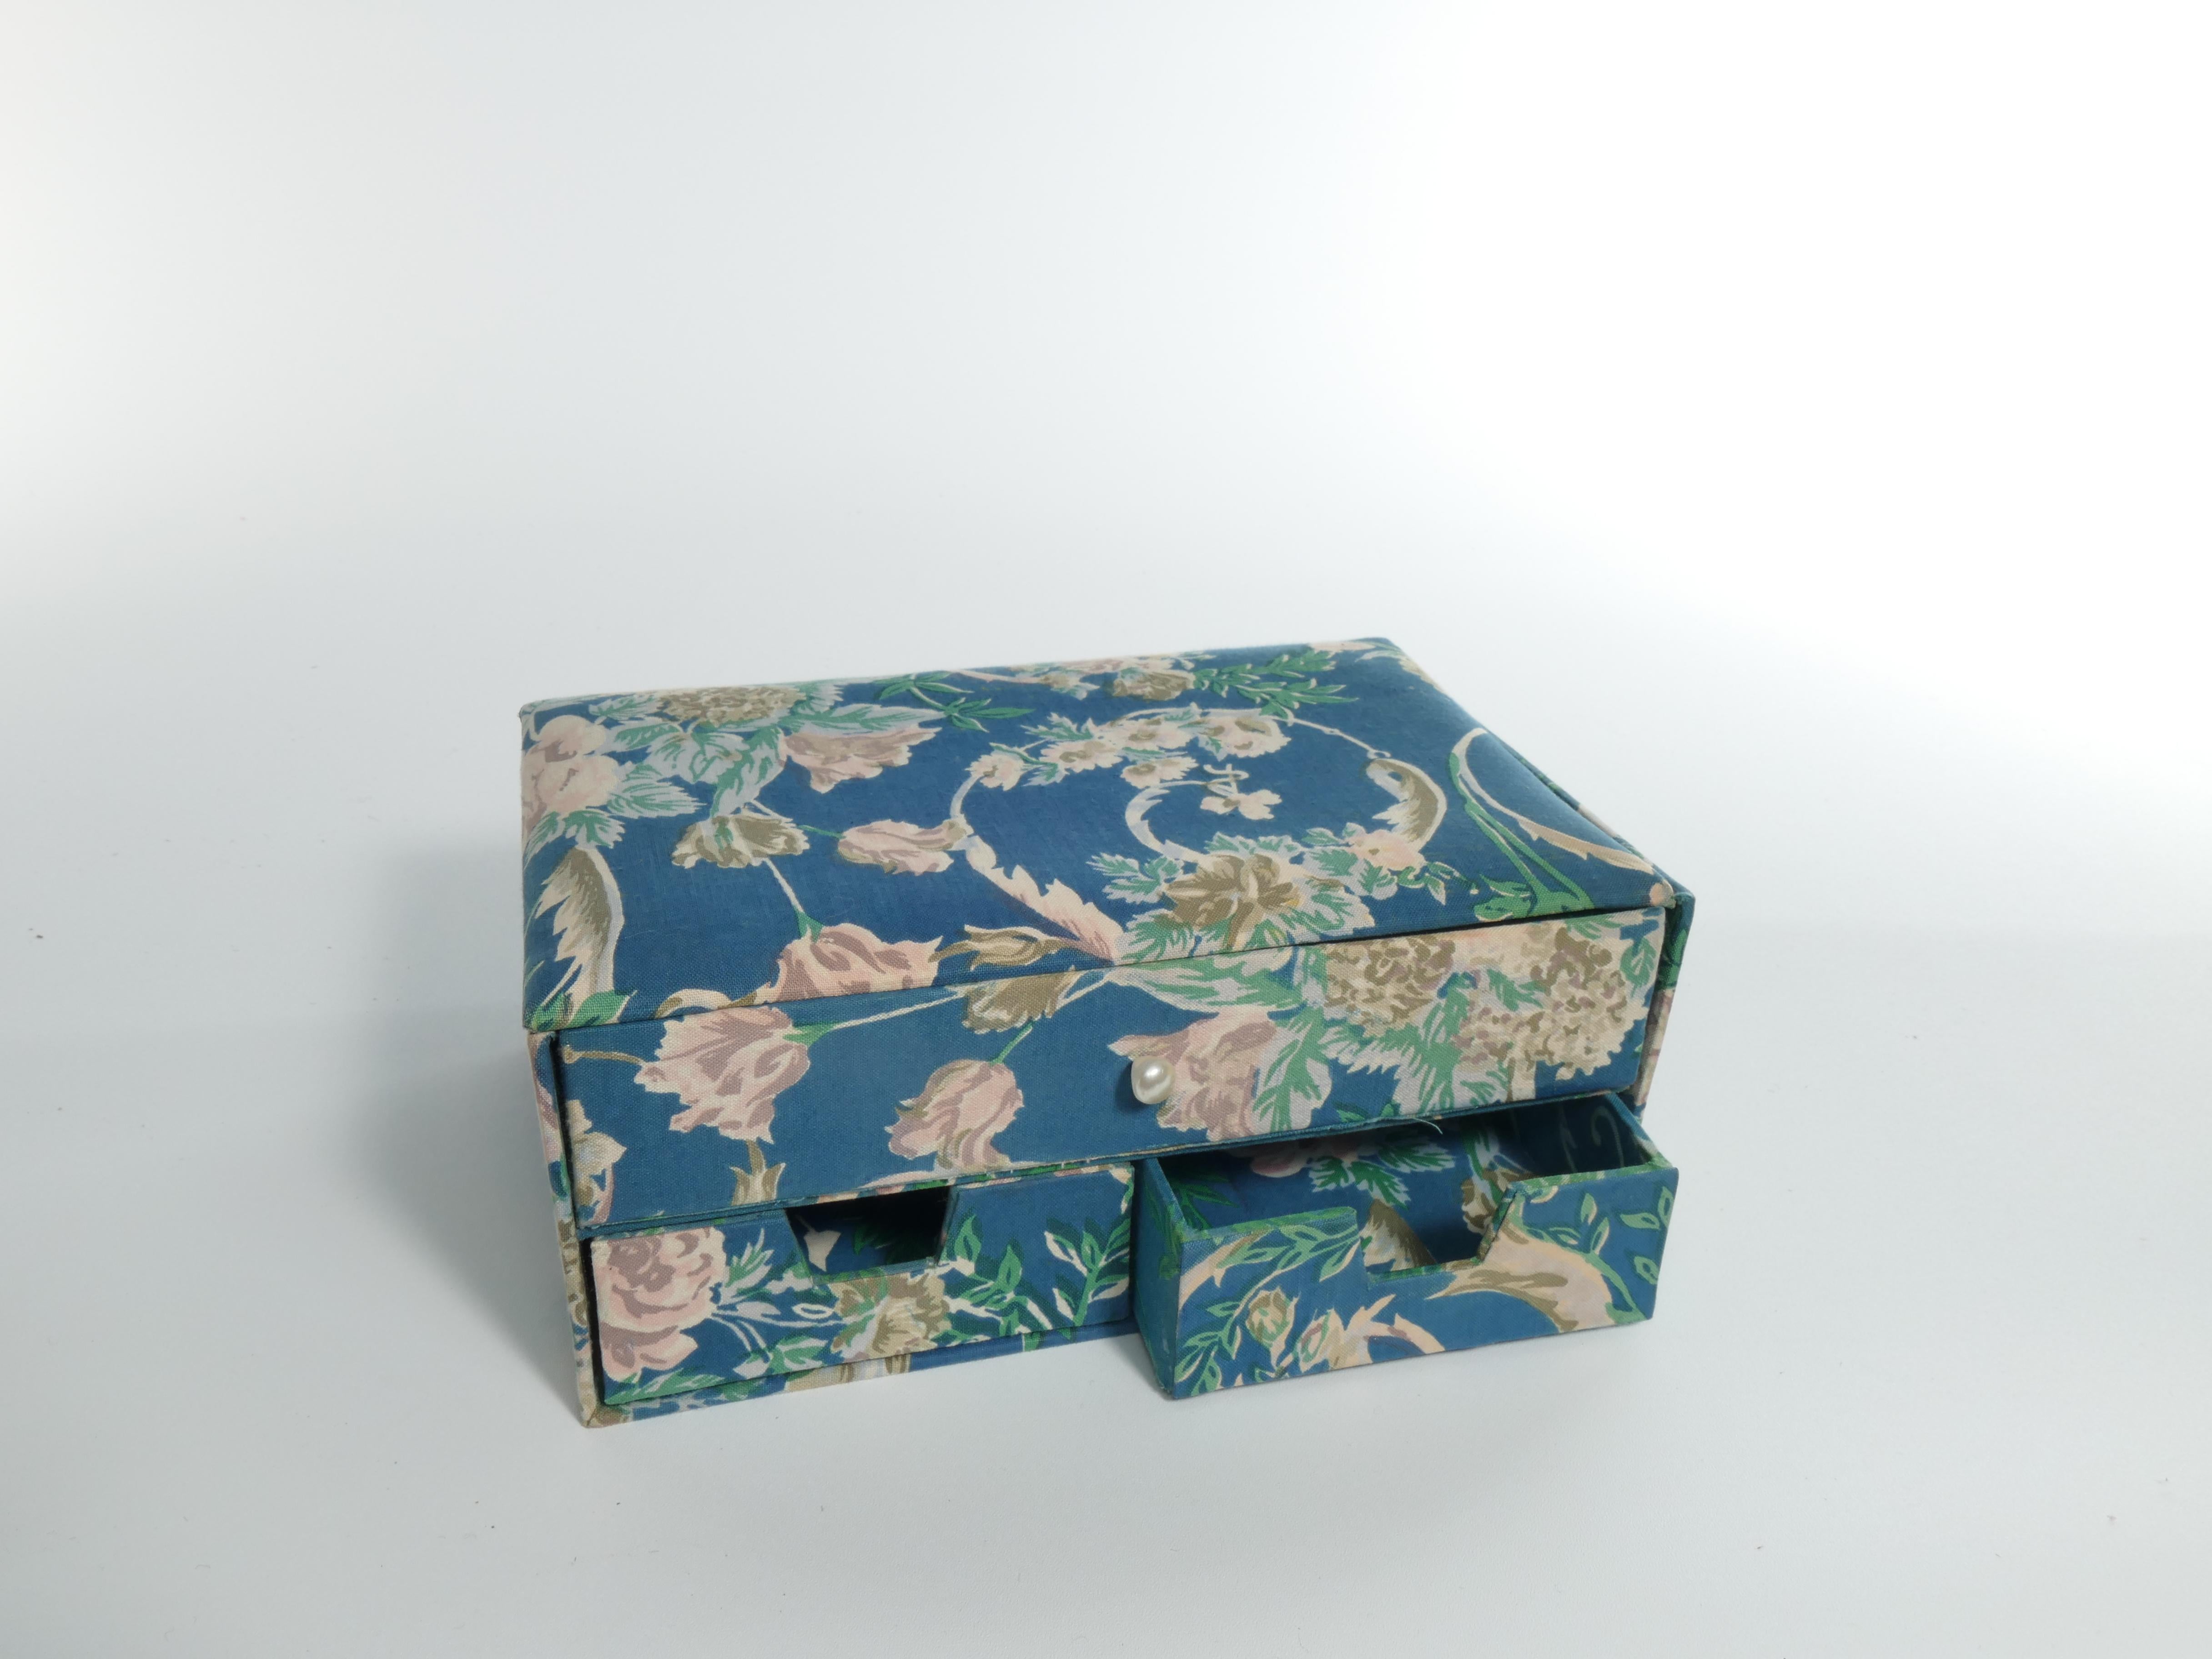 Vintage Jewelry Box in Blue Textile With Floral Motifs For Sale 3